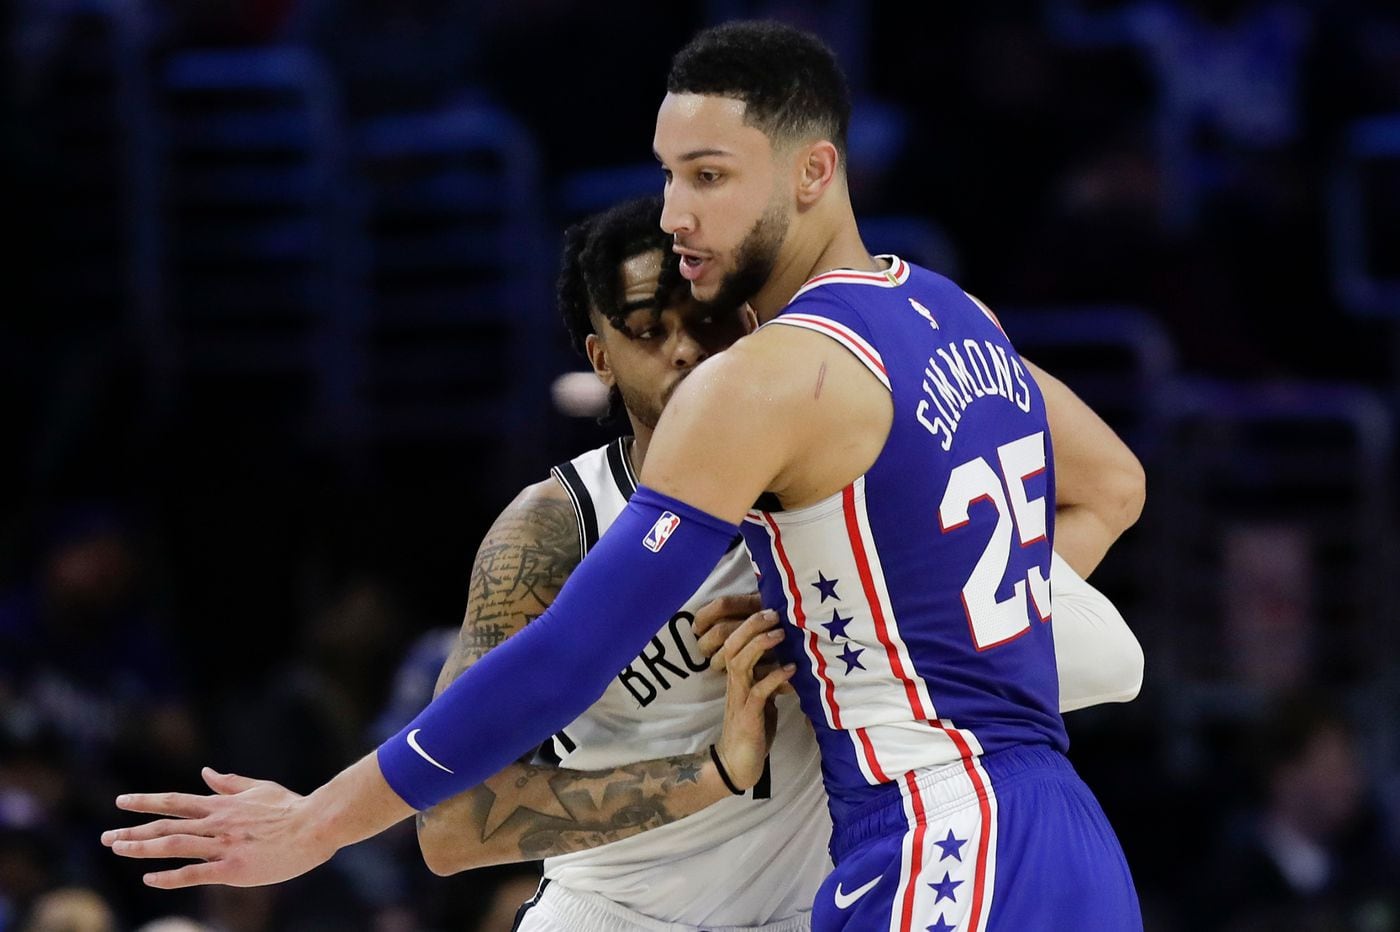 Sixers-Nets observations: Ben Simmons’ defense, Joel Embiid’s quick thinking shine